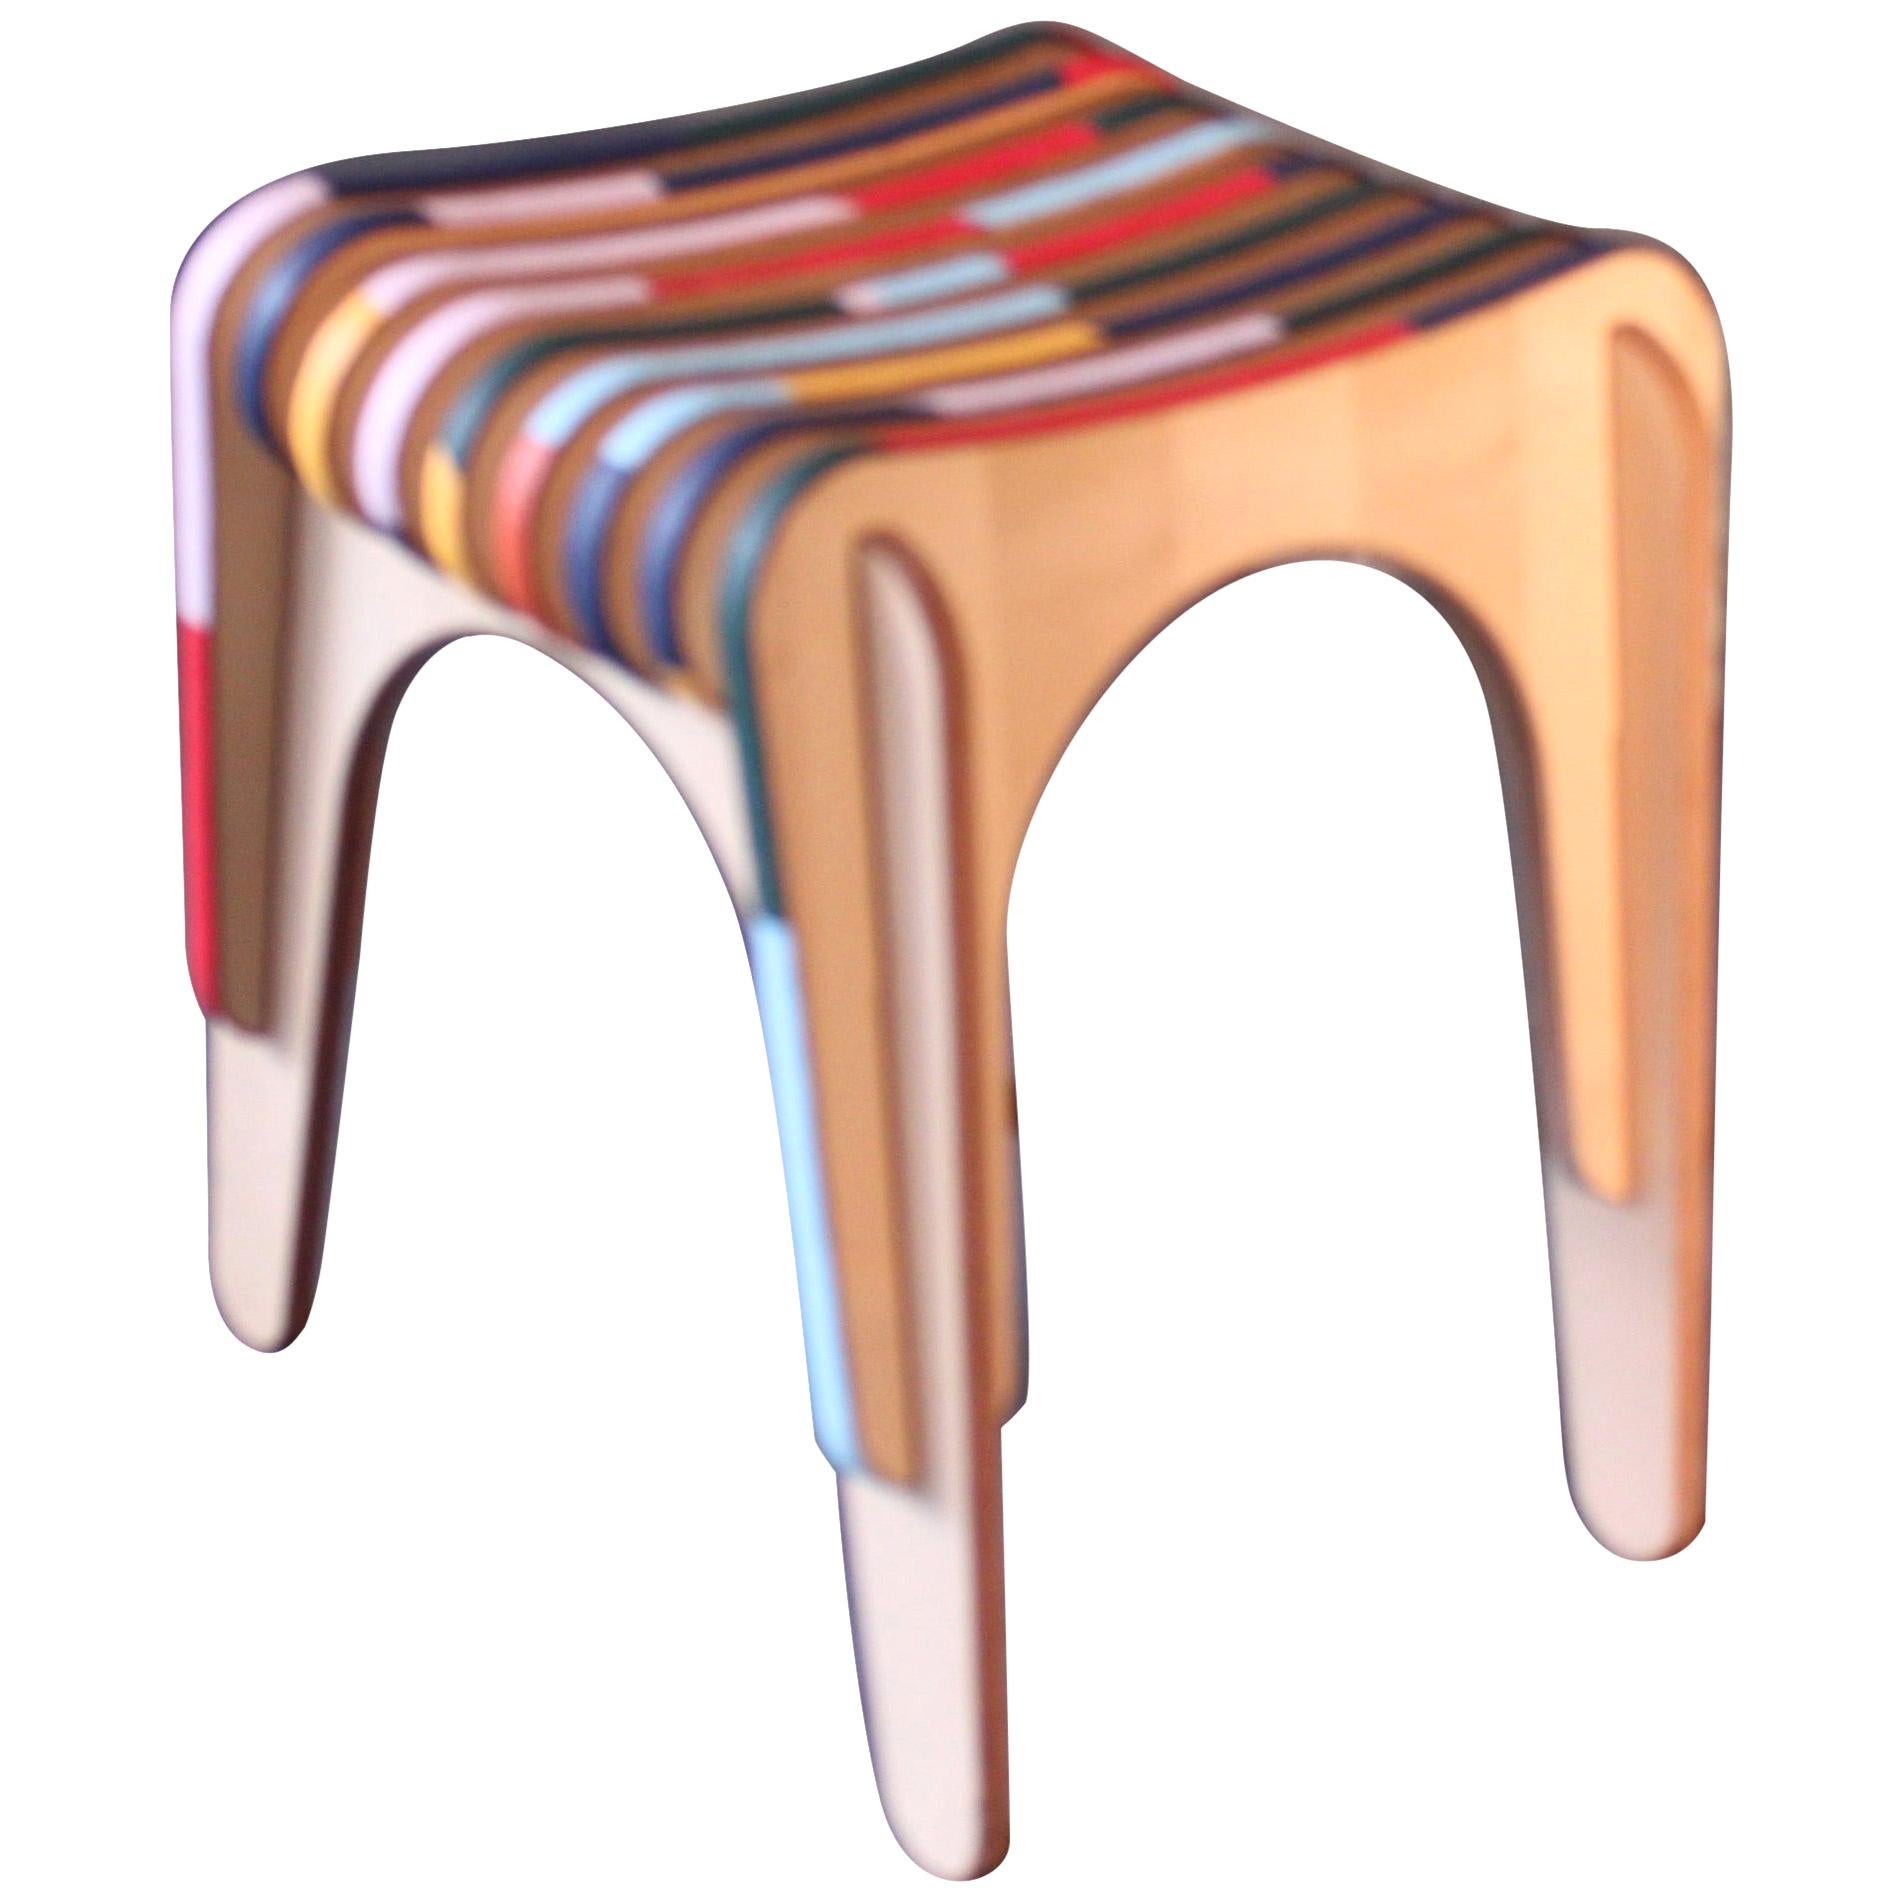 Stool "In leather we trust" by Markus Friedrich Staab For Sale